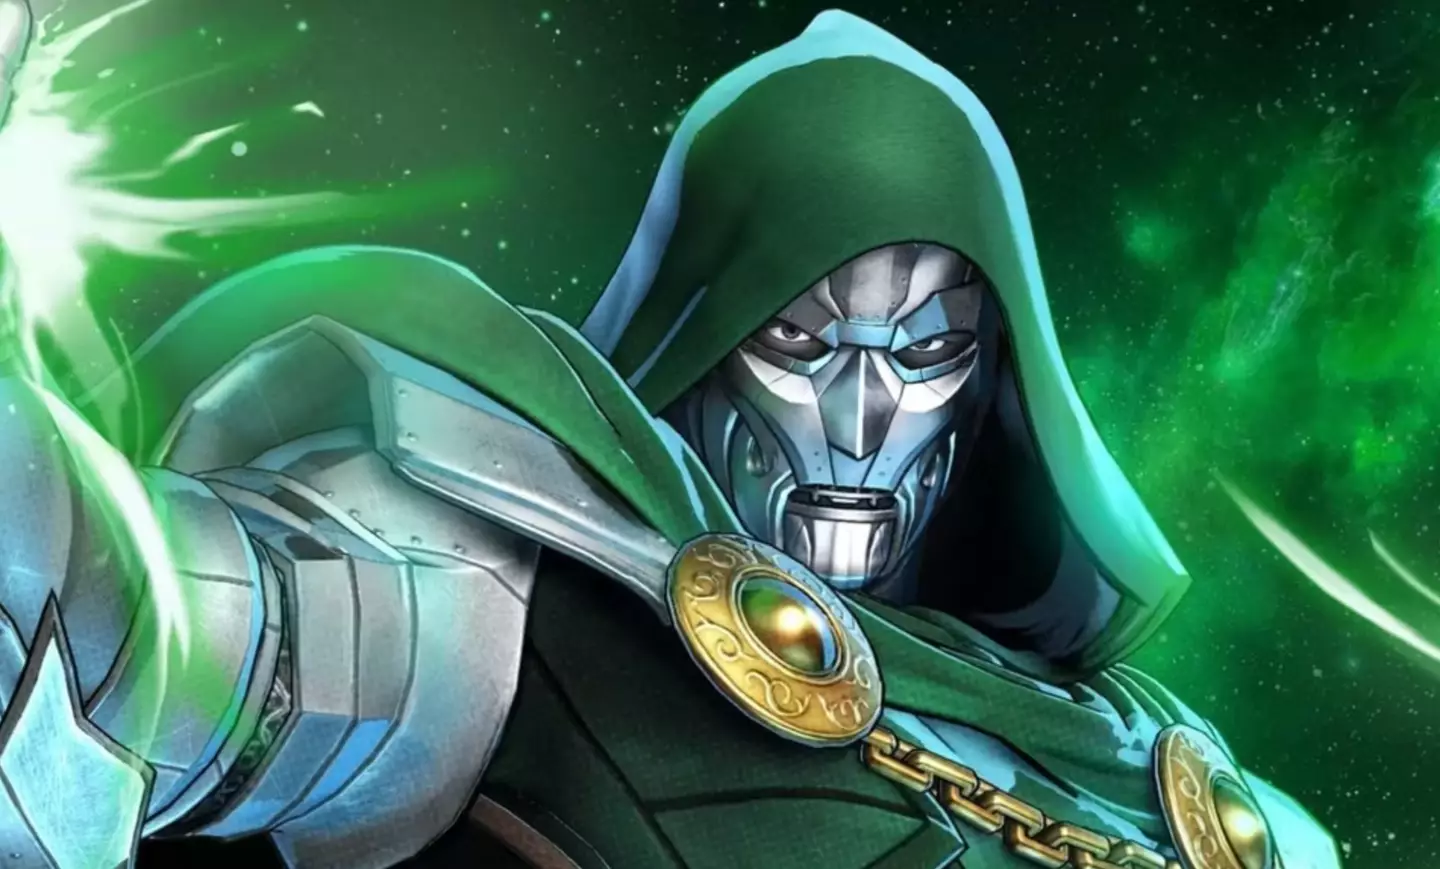 Doctor Doom could potentially fill the space.